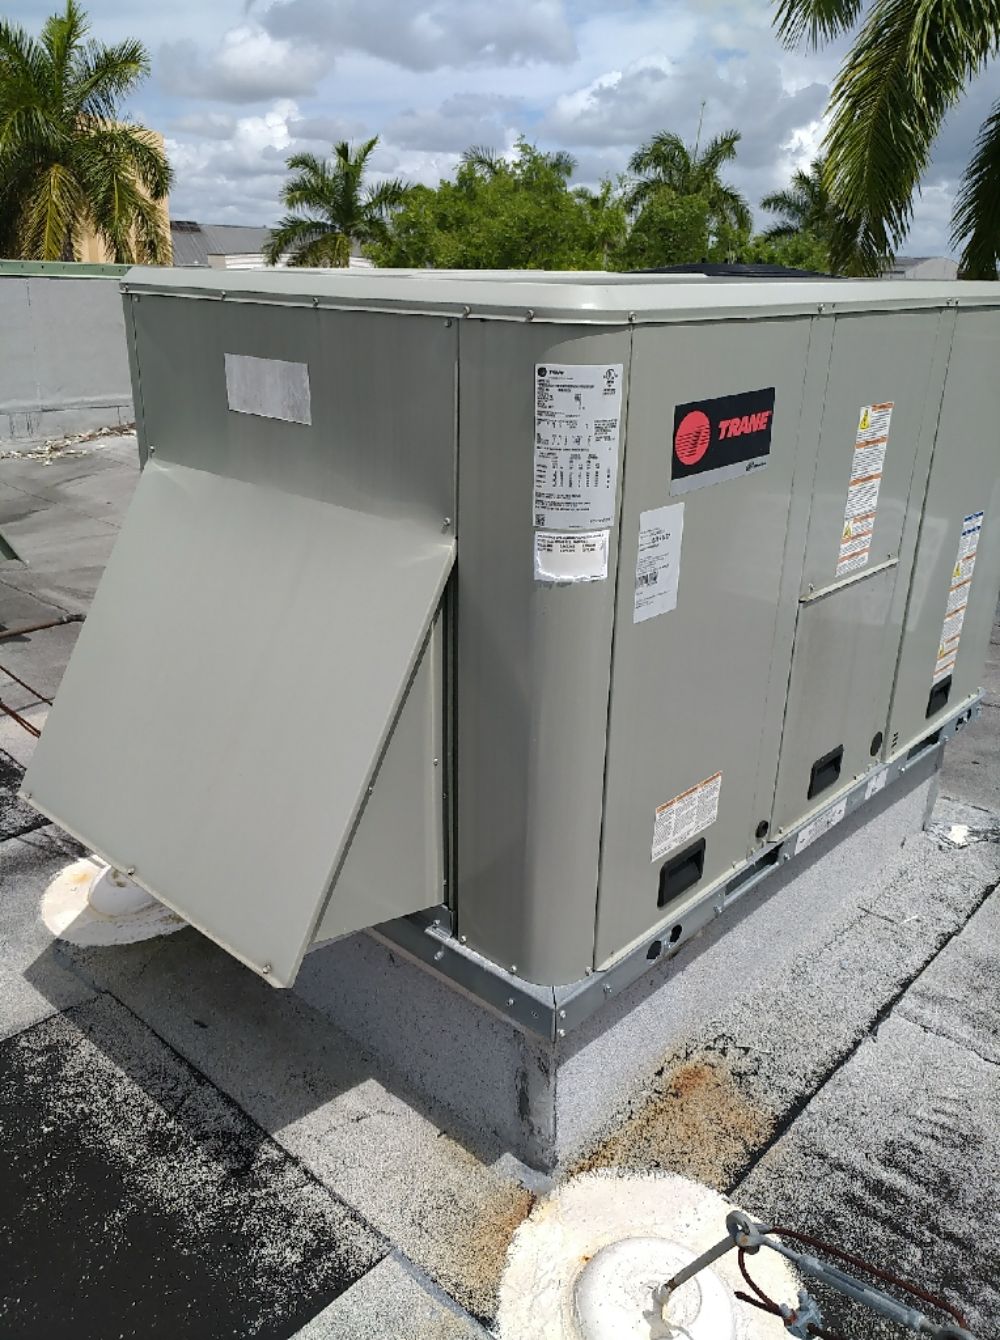 Trane commercial air conditioning ionstallation in sunrise fl